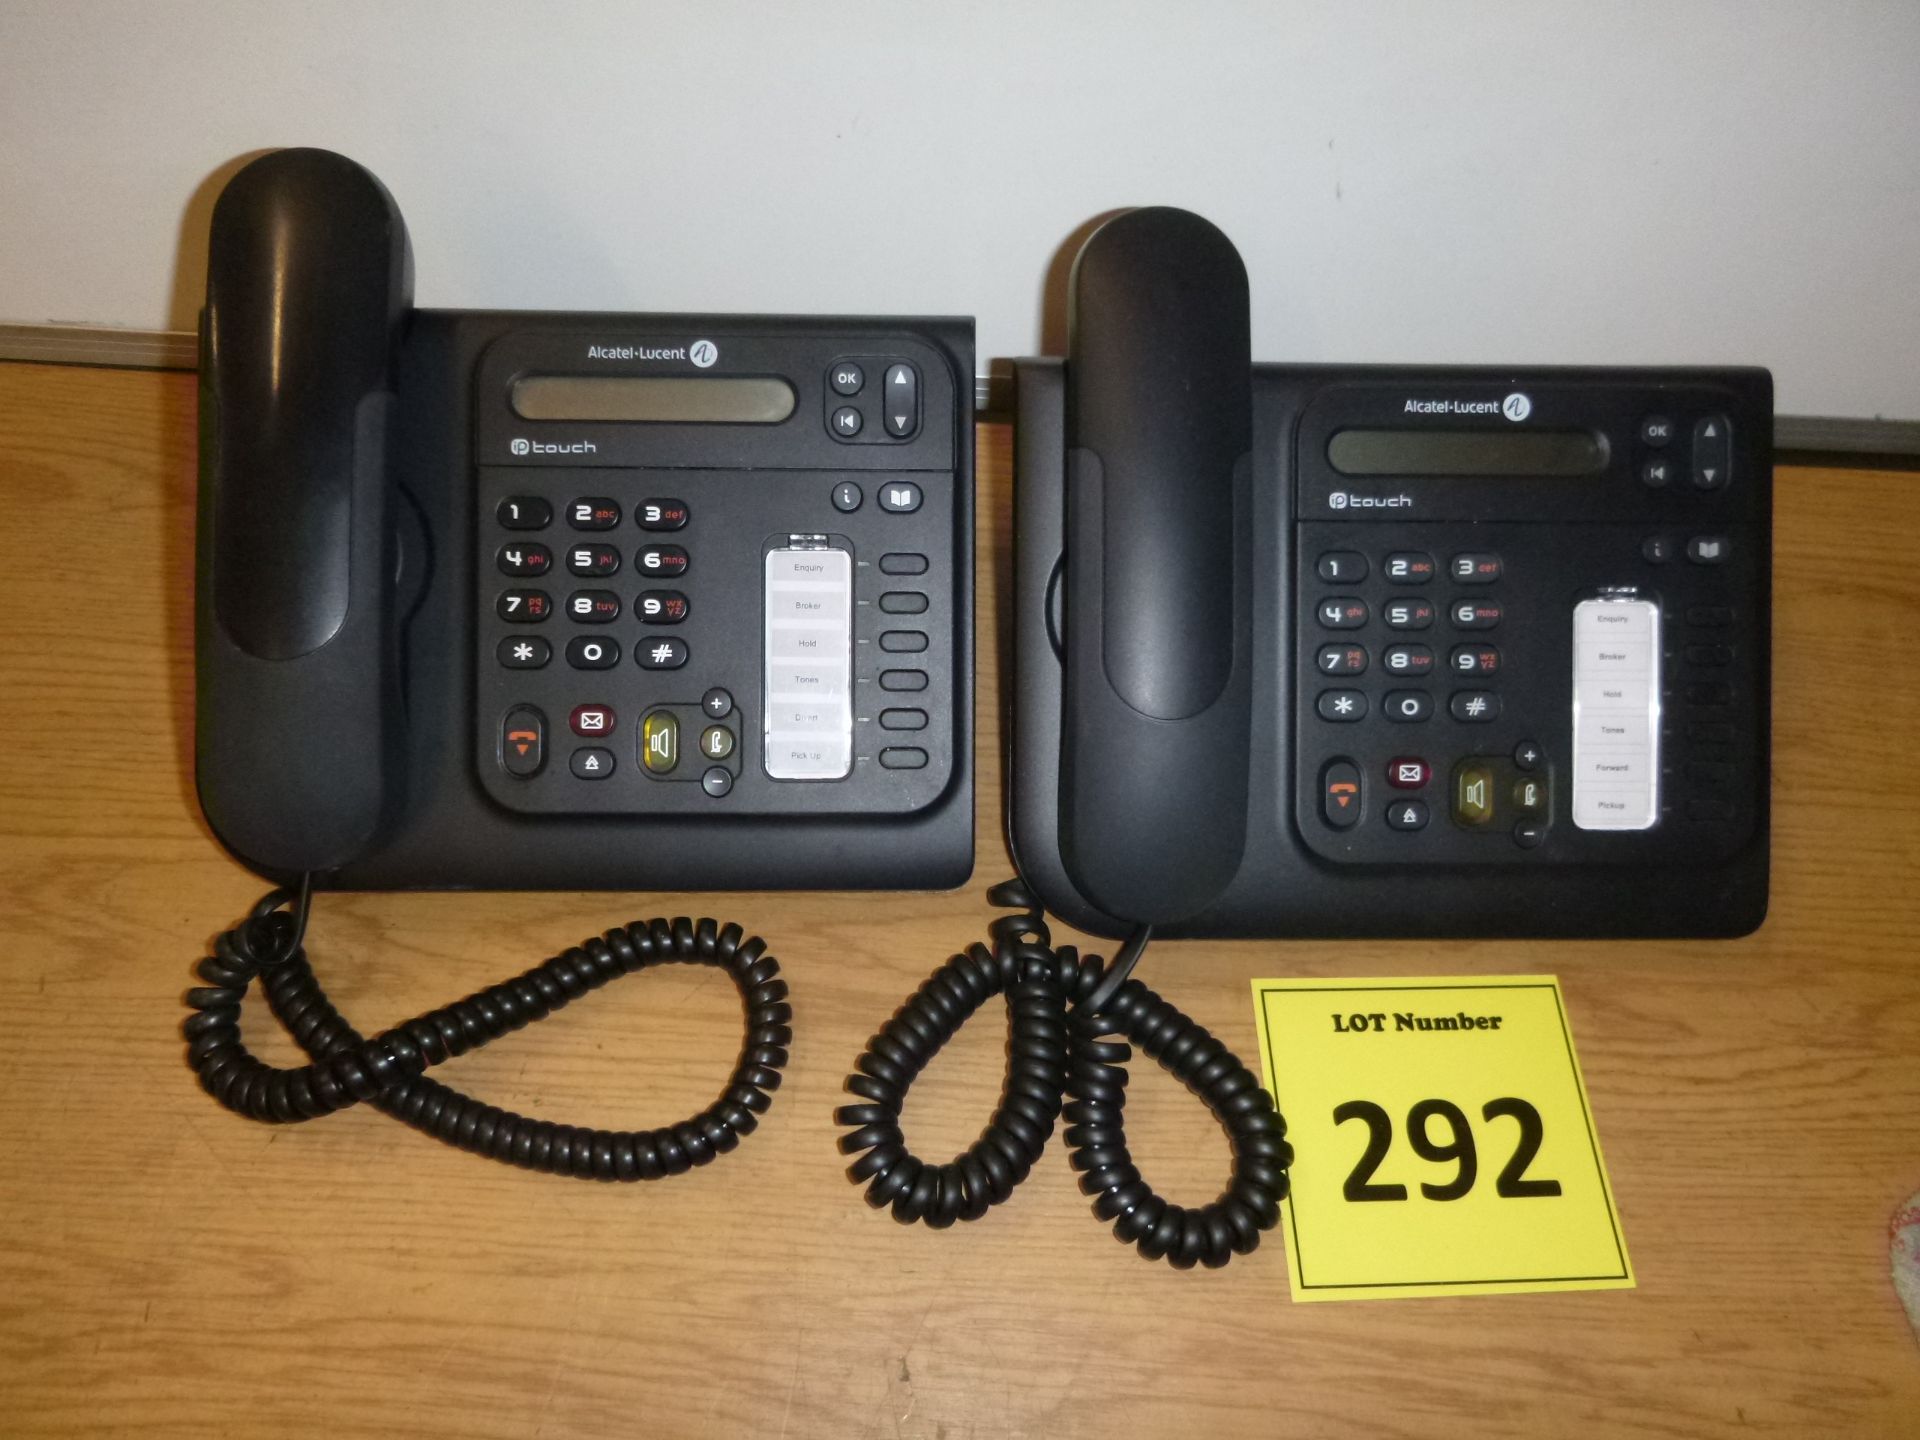 2 X ALCATEL LUCENT IP TOUCH 4018 IP EXTENDED EDITION TELEPHONES